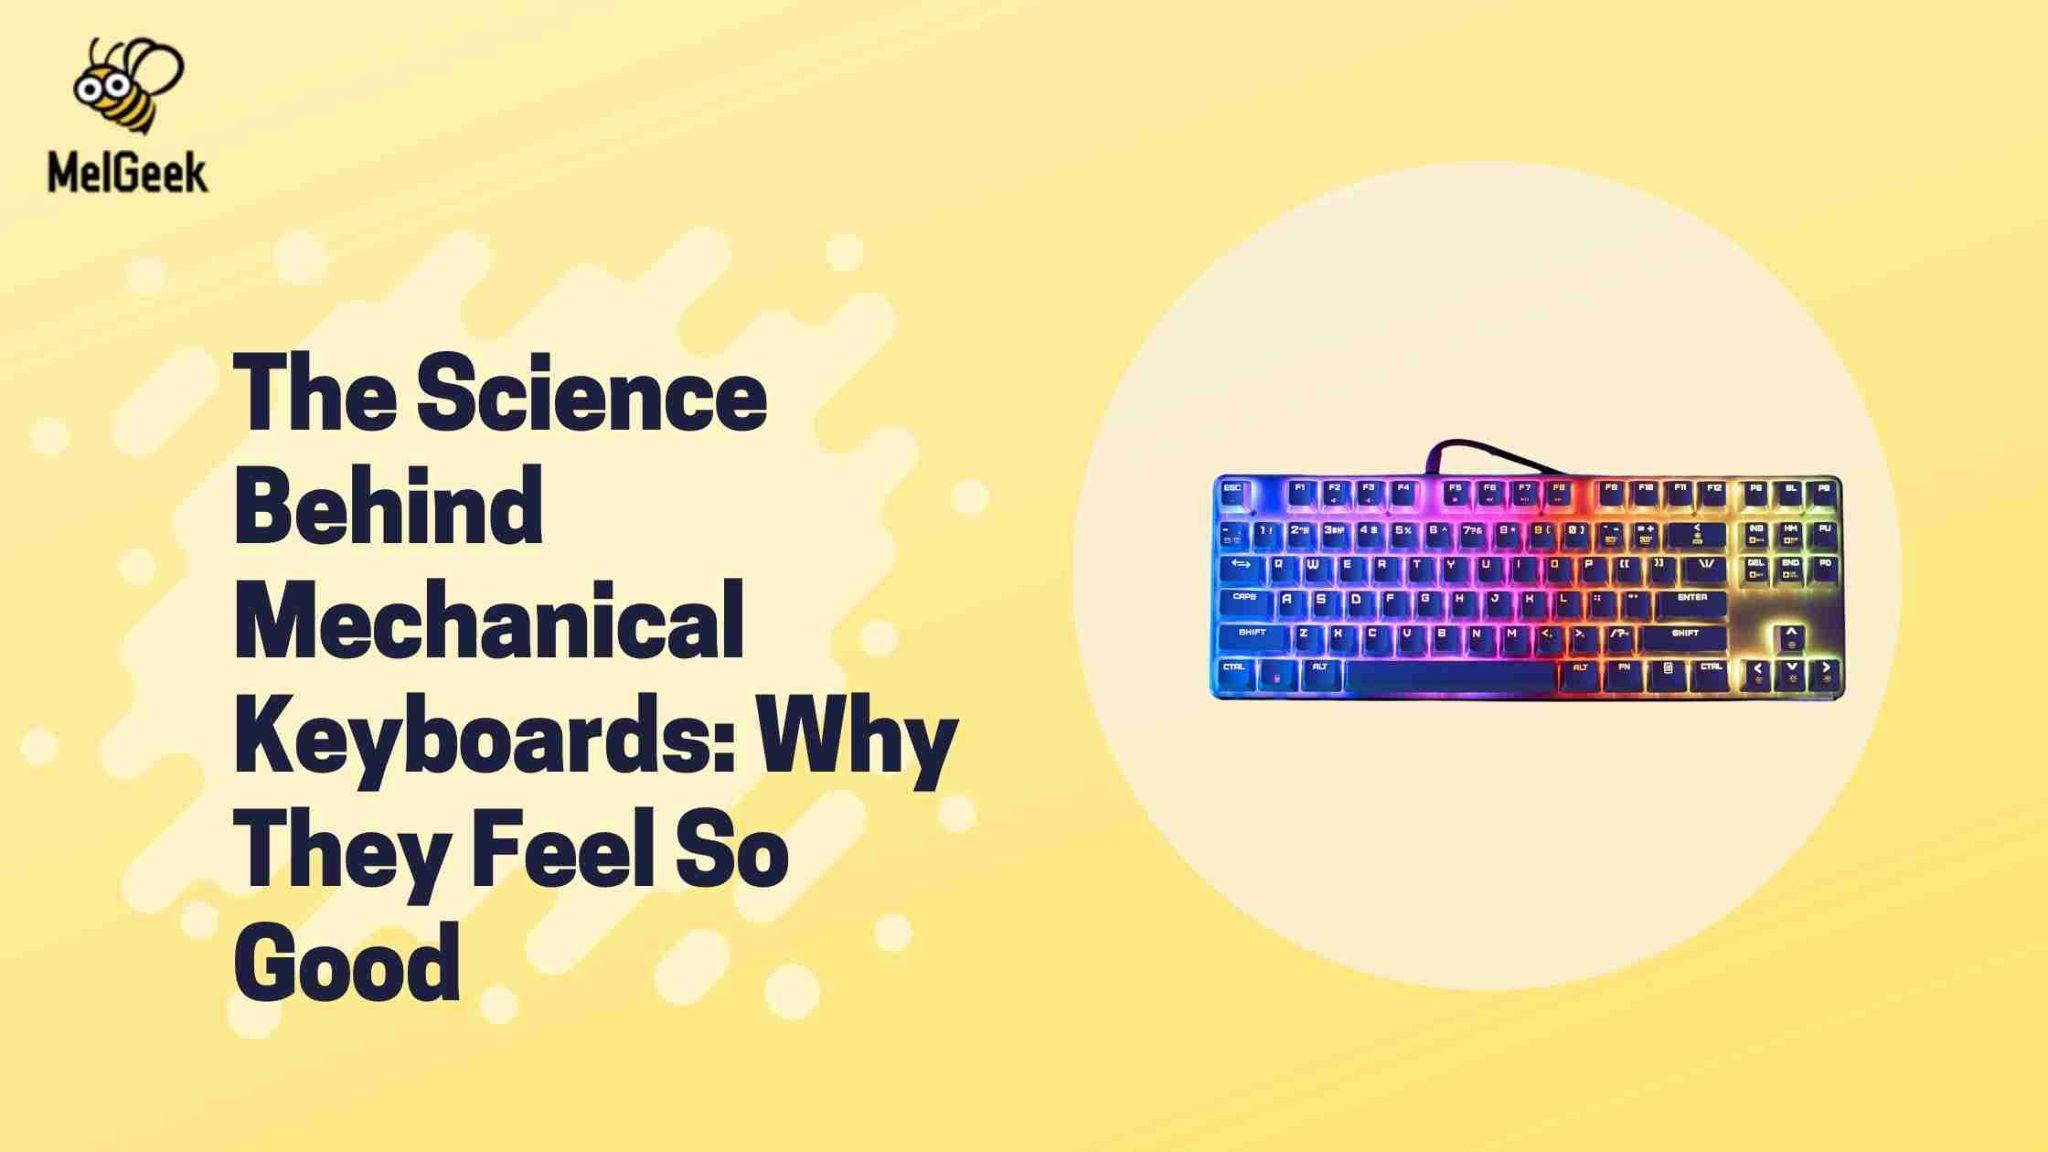 The Science Behind Mechanical Keyboards: Why They Feel So Good